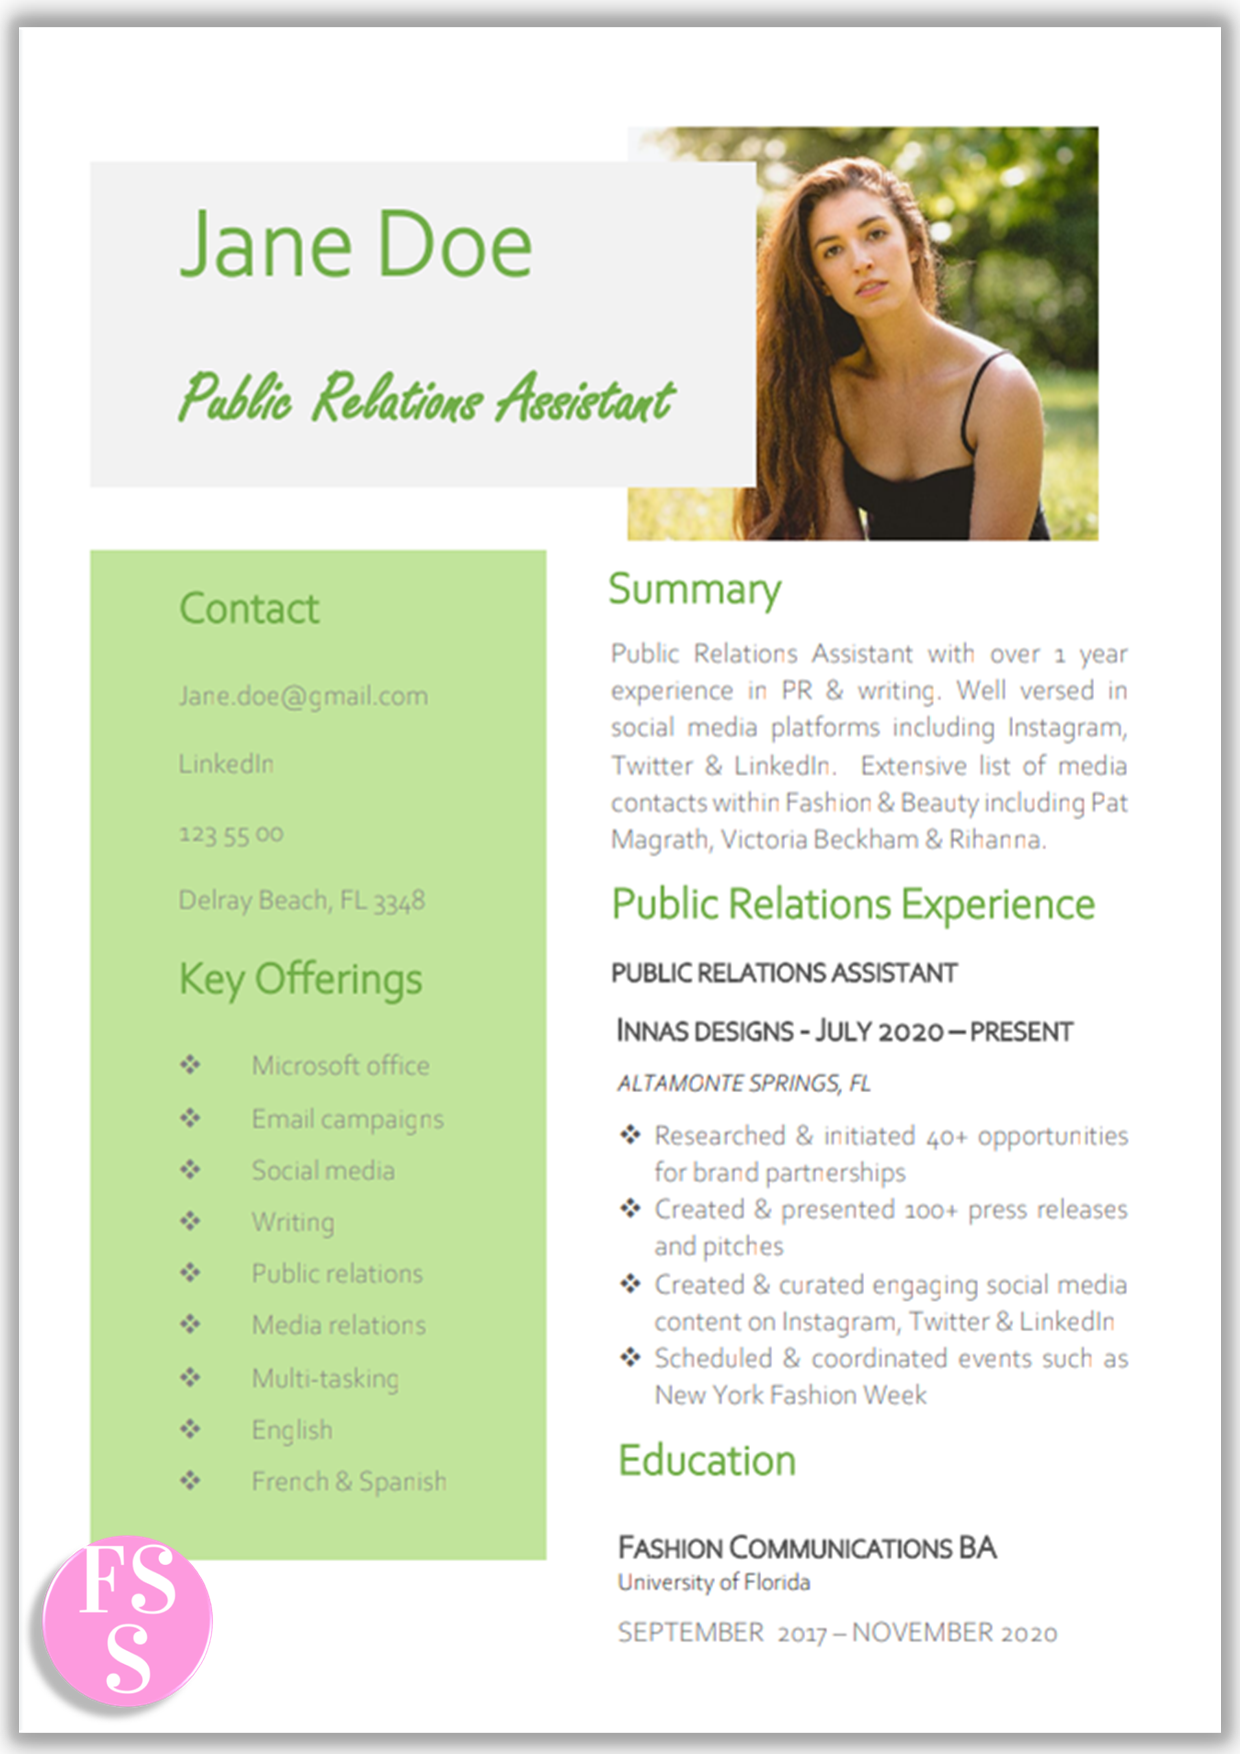 Fashion PR Resume Sample: Template + Matching Cover Letter… This creative resume design will have recruiters clamoring over you. Visit our website for more.